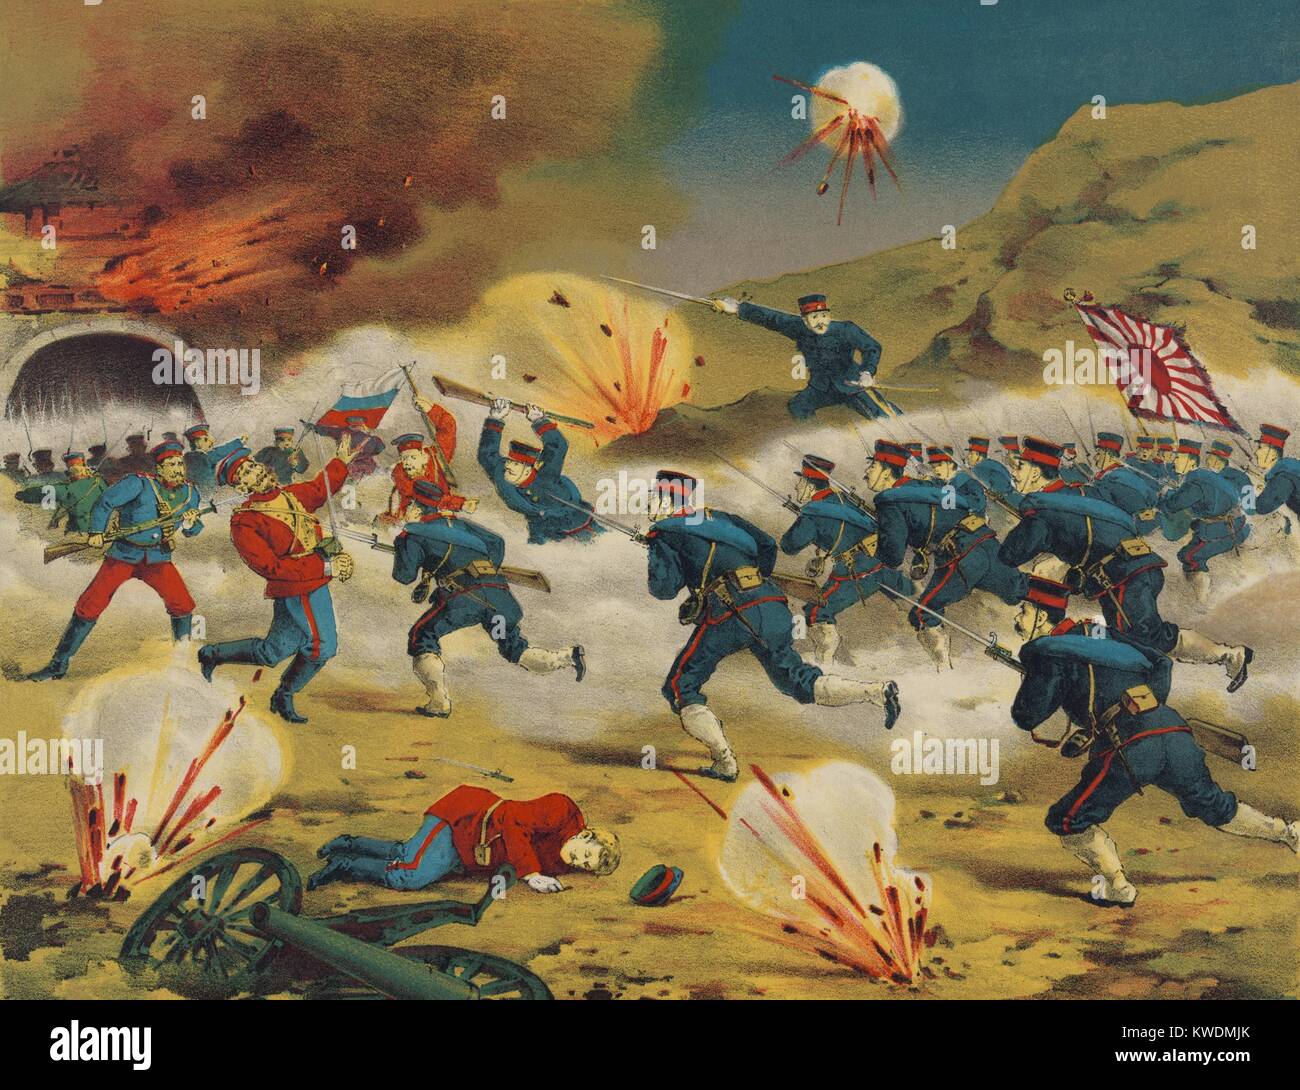 Japanese and Russian soldiers in fierce battle at Chiu-tien-Cheng, Manchuria. This action is known as the Battle of Yalu River, May 1904, which ended when the Russian army retreated, but also leaving part of the army to surrender to the Japanese. Russo-Japanese War (BSLOC 2017 18 109) Stock Photo